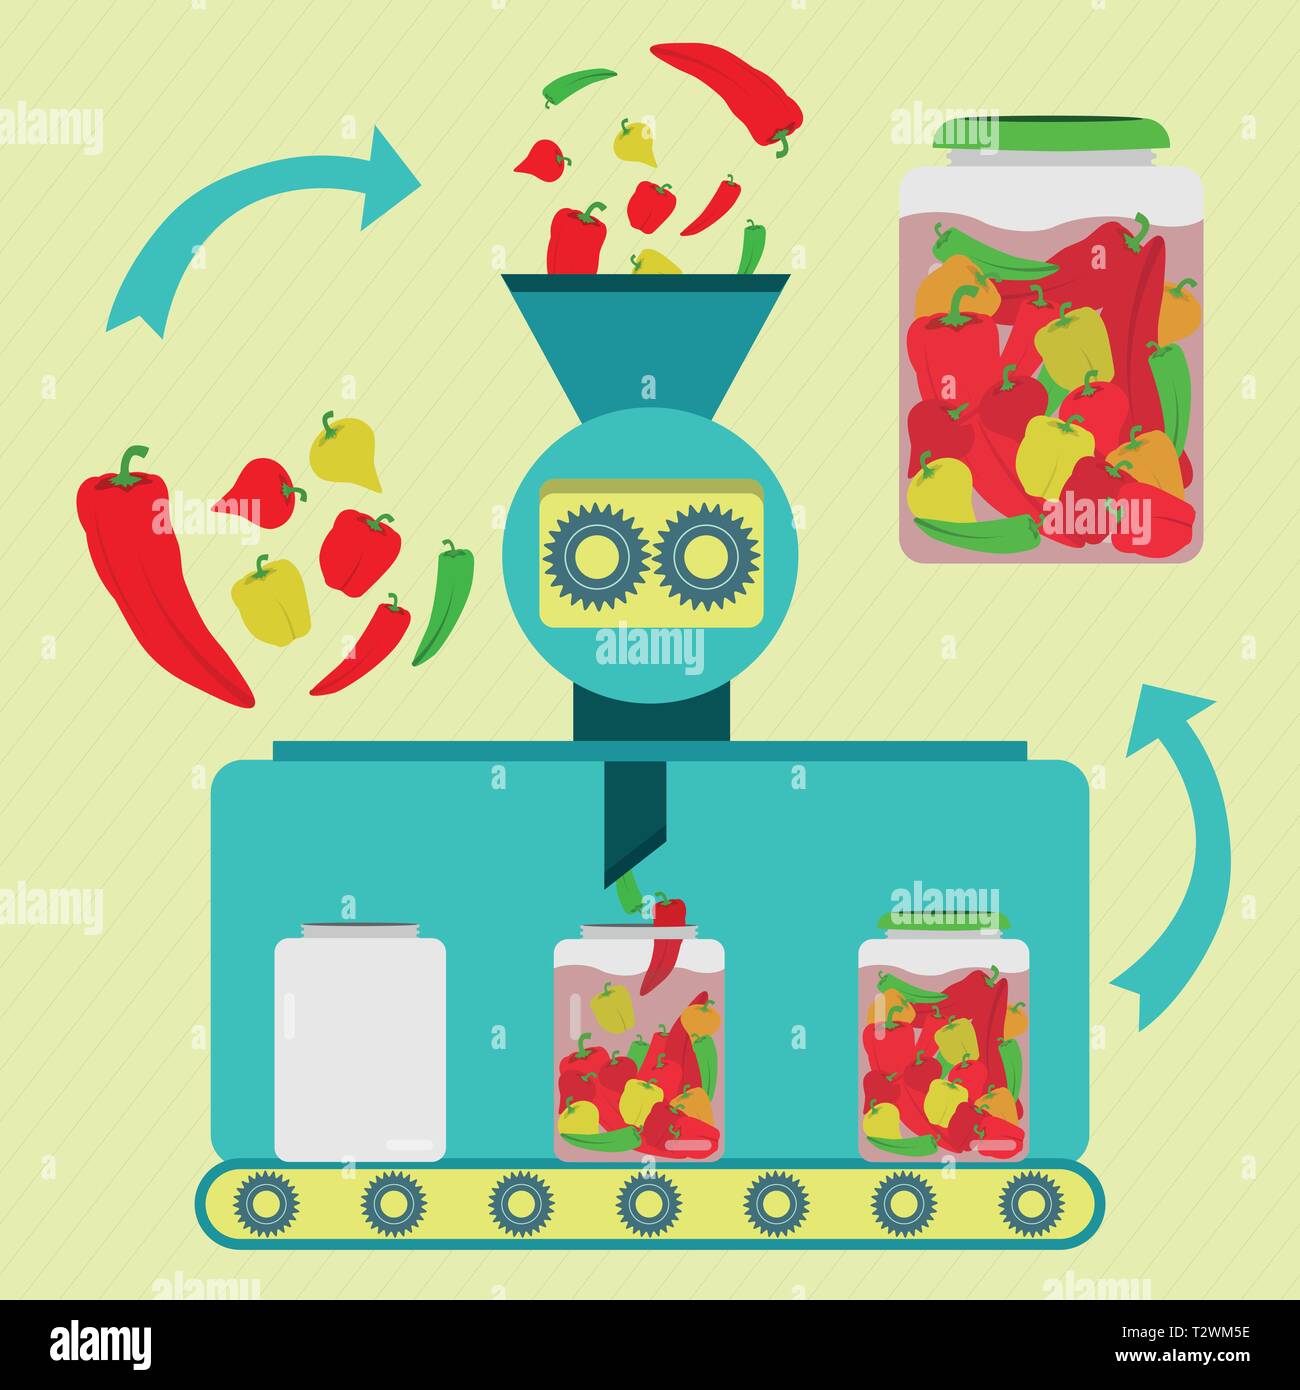 Pickles series production. Chilli peppers pickles series production. Fresh assorted chilli peppers being processed. Bottled pickled chilli peppers. Stock Vector